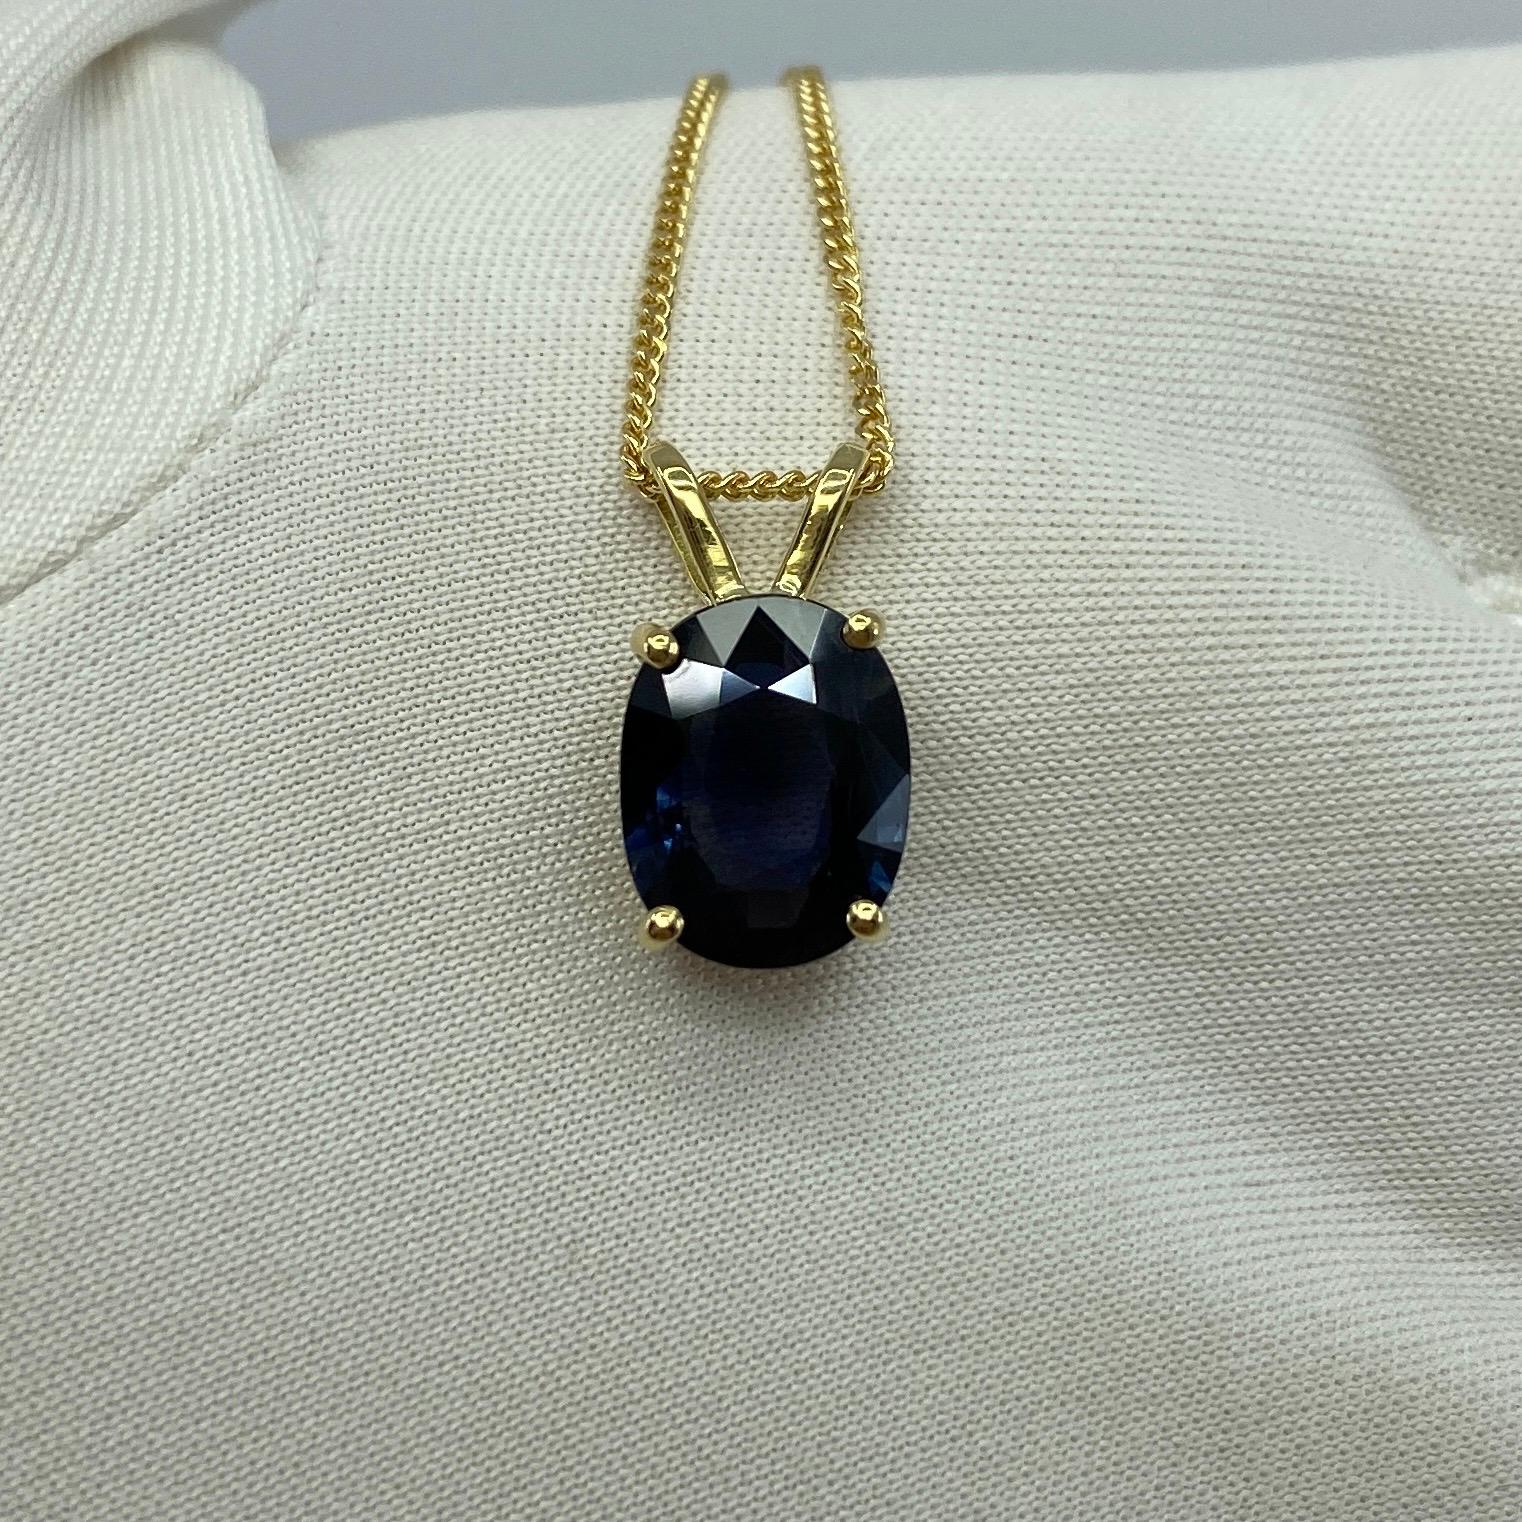 GIA Certified 2.51ct Untreated Deep Blue Sapphire Oval 18k Yellow Gold Pendant 7